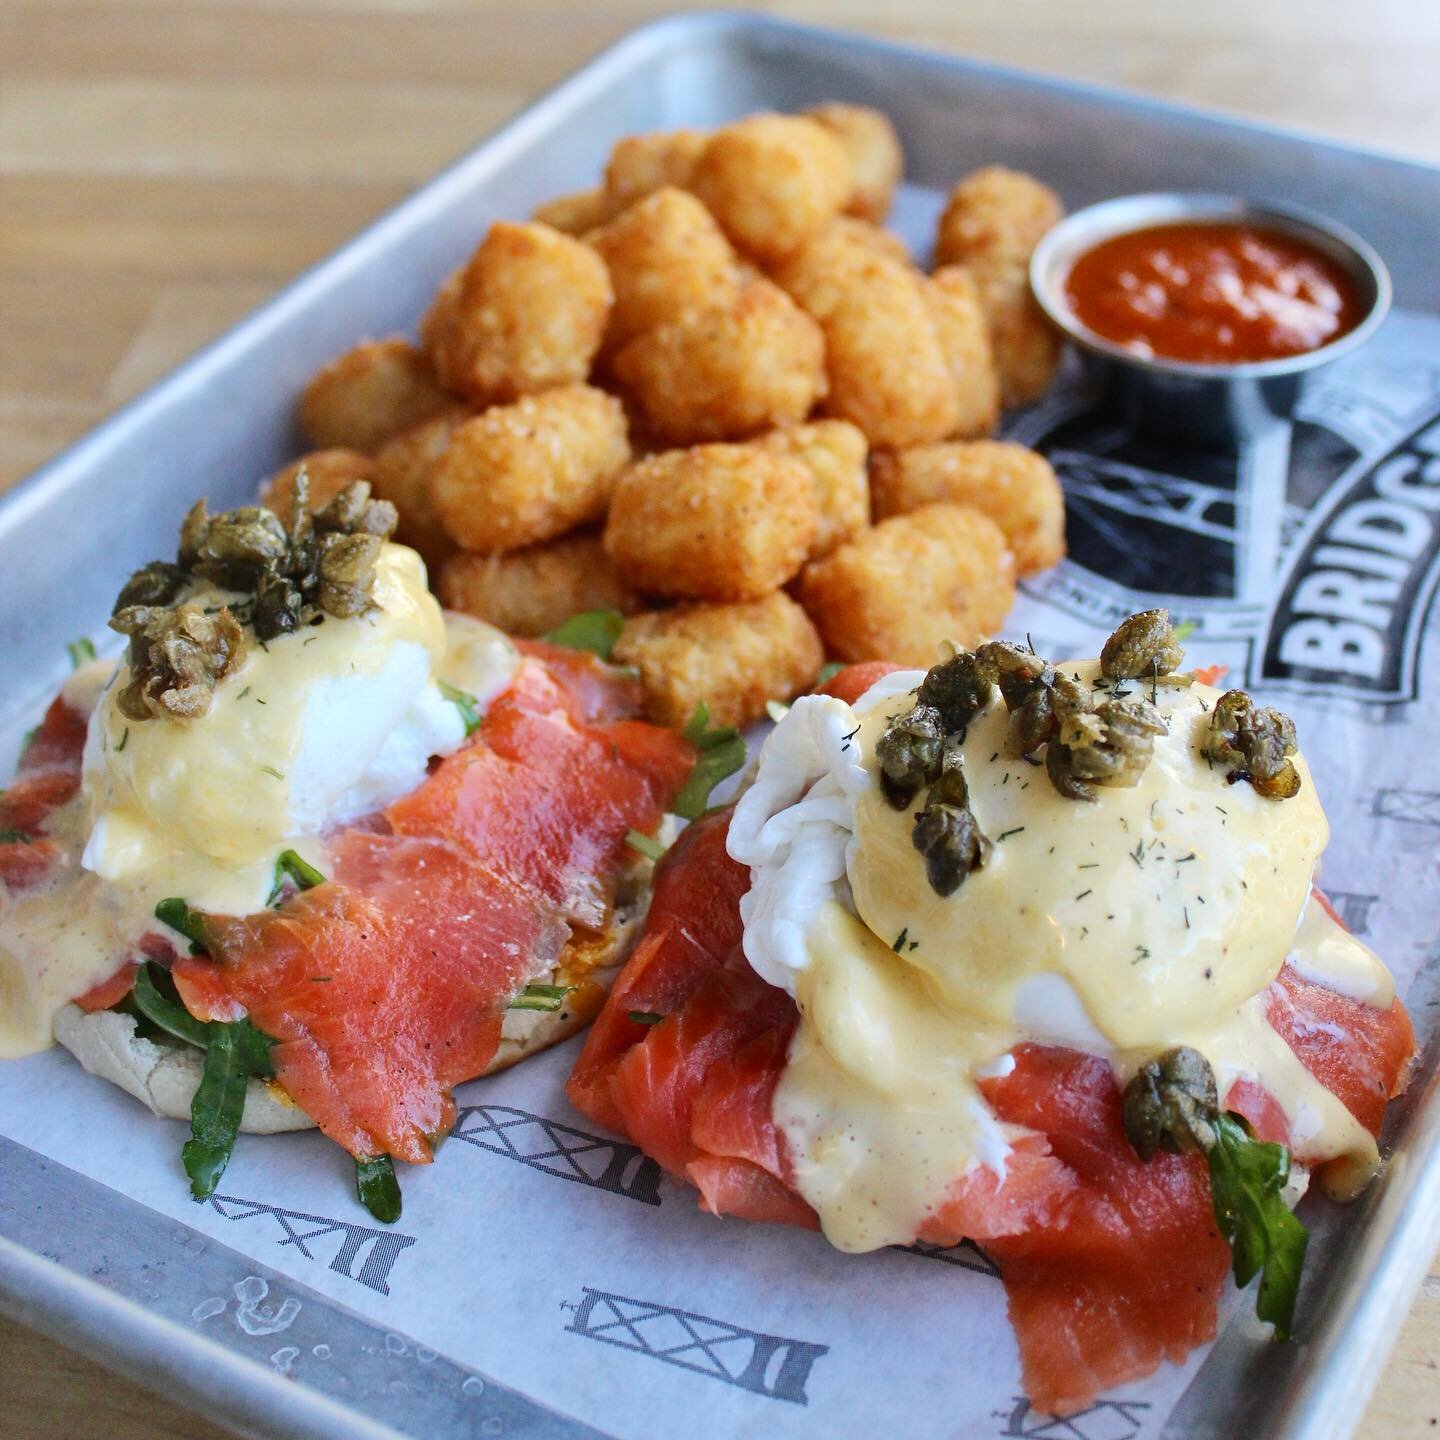 Check out our newest brunch feature: The Smoked Salmon Benny 🍳

@tworiversmeats eggs, smoked salmon, fried capers, arugula tossed in lemon oil and house made hollandaise all placed on top of an English muffin and served with tater tots and house mad